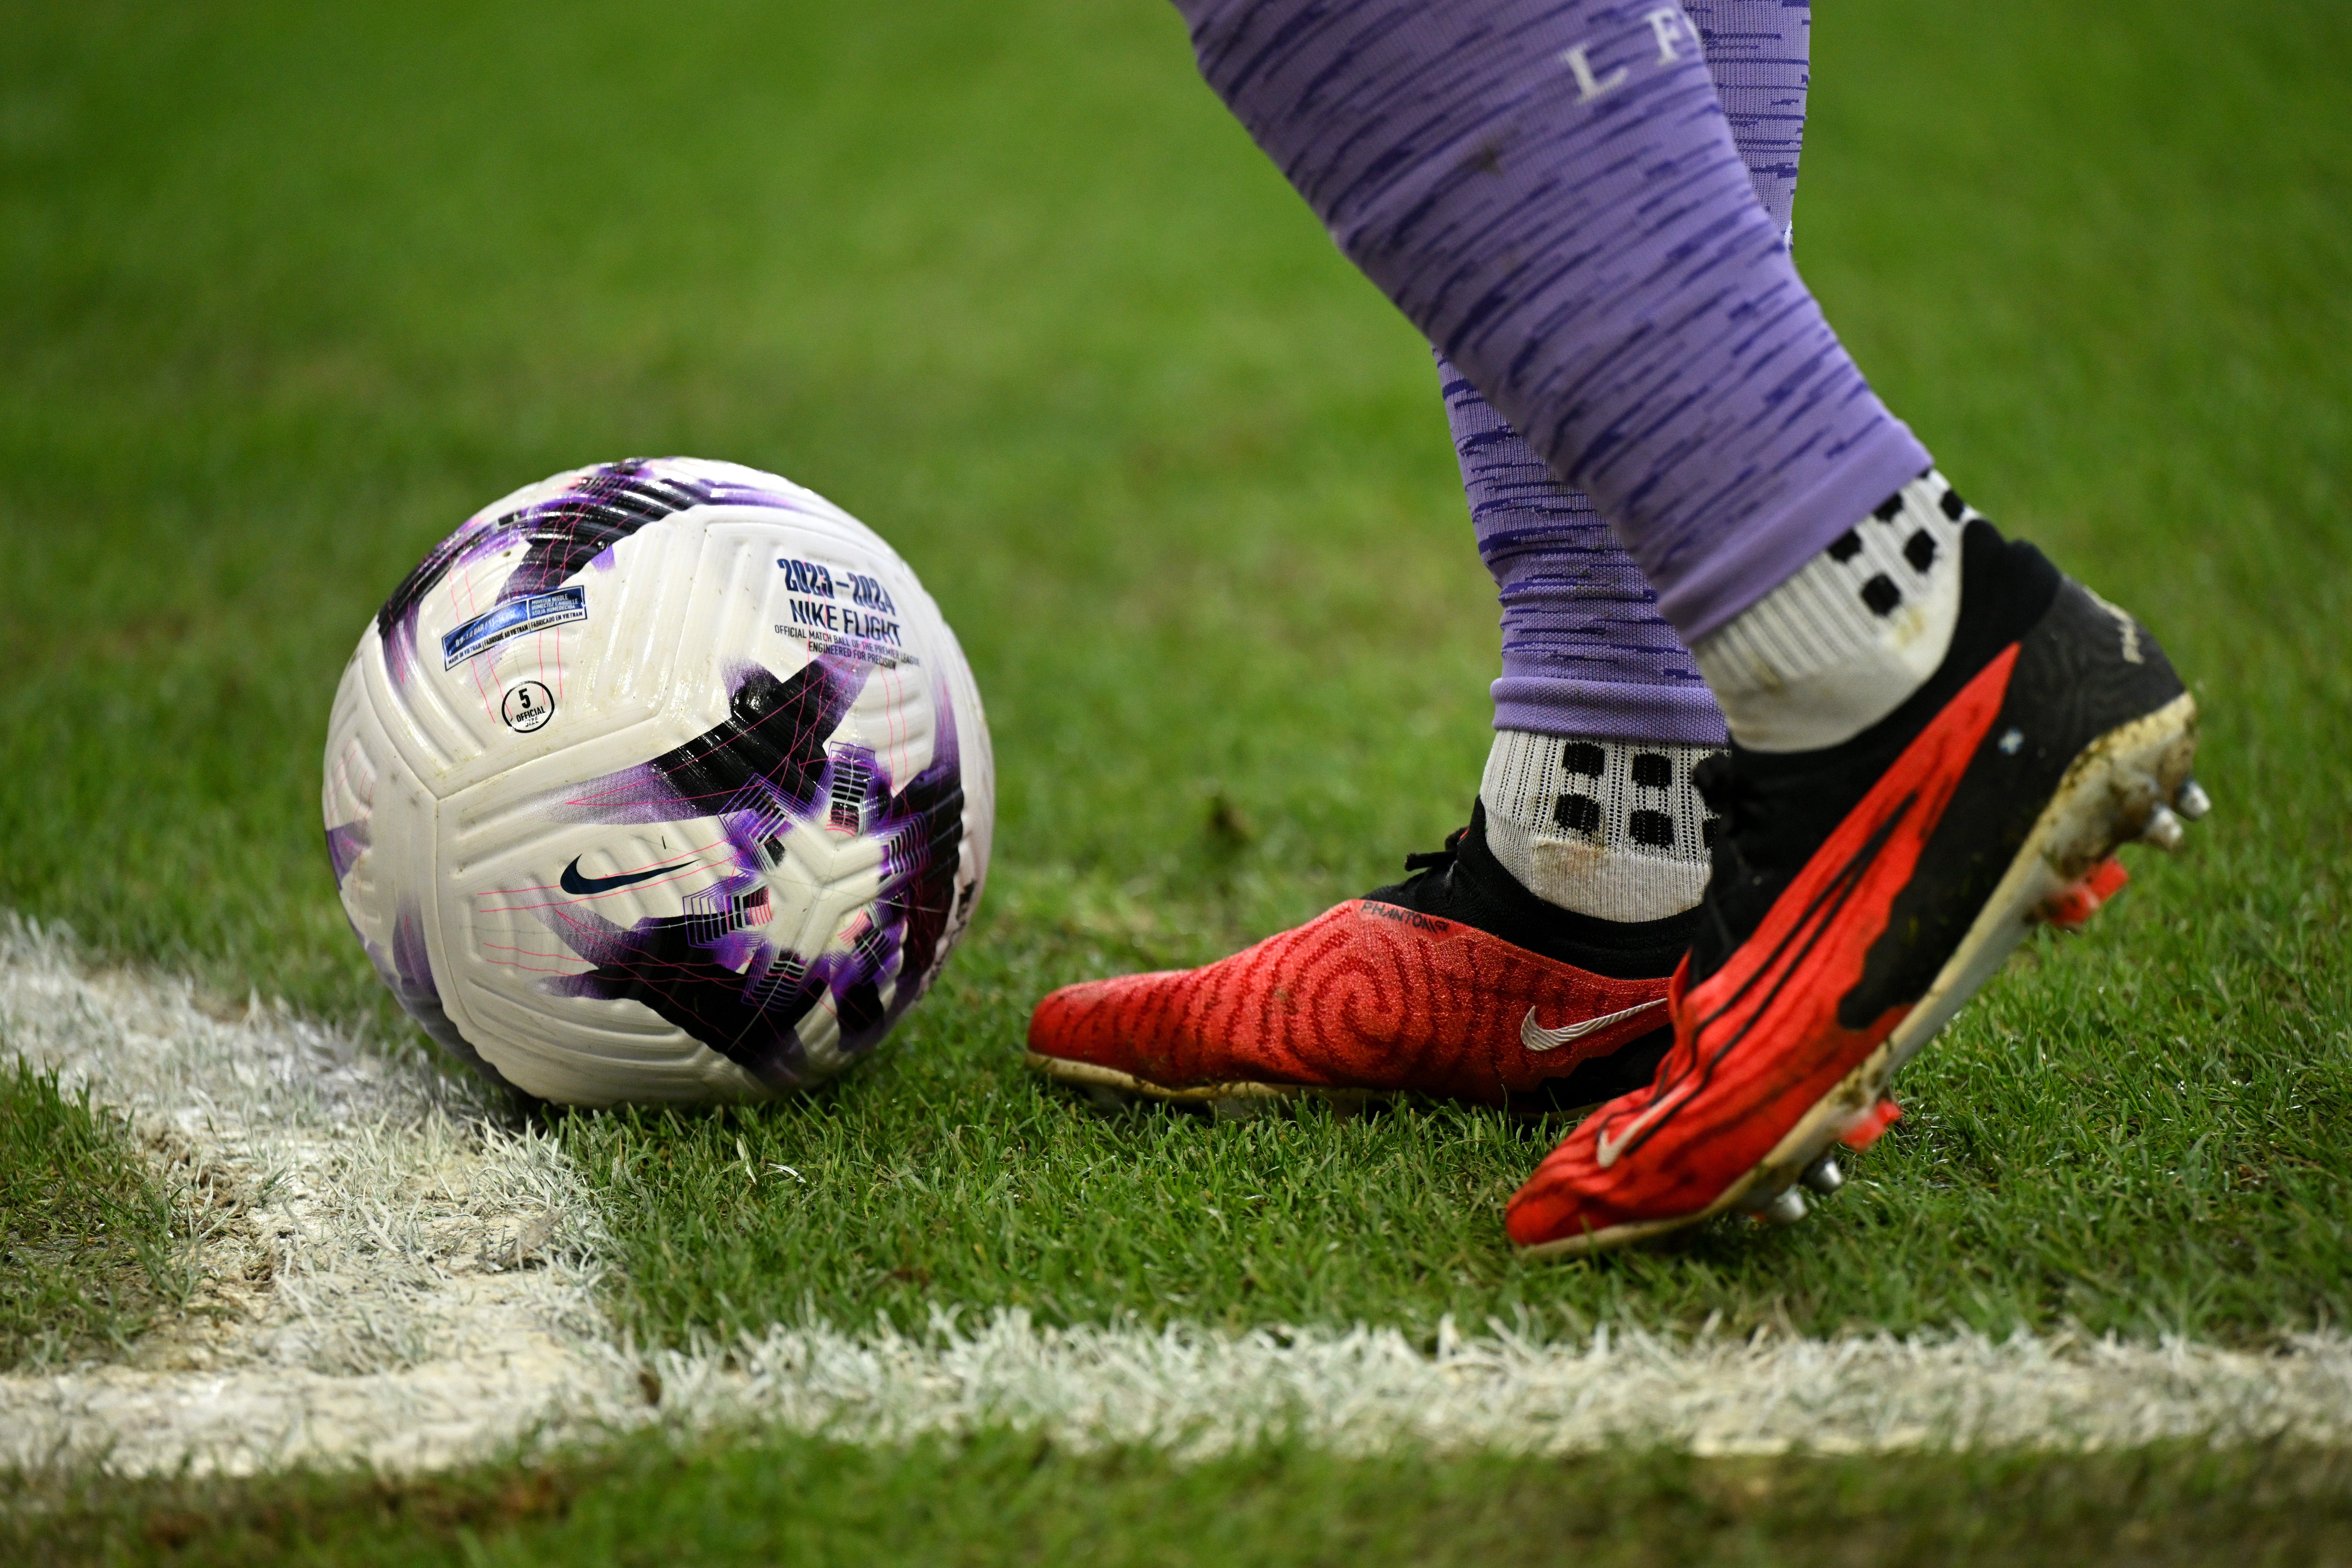 Football faces a race against time in its battle to secure an independent regulator